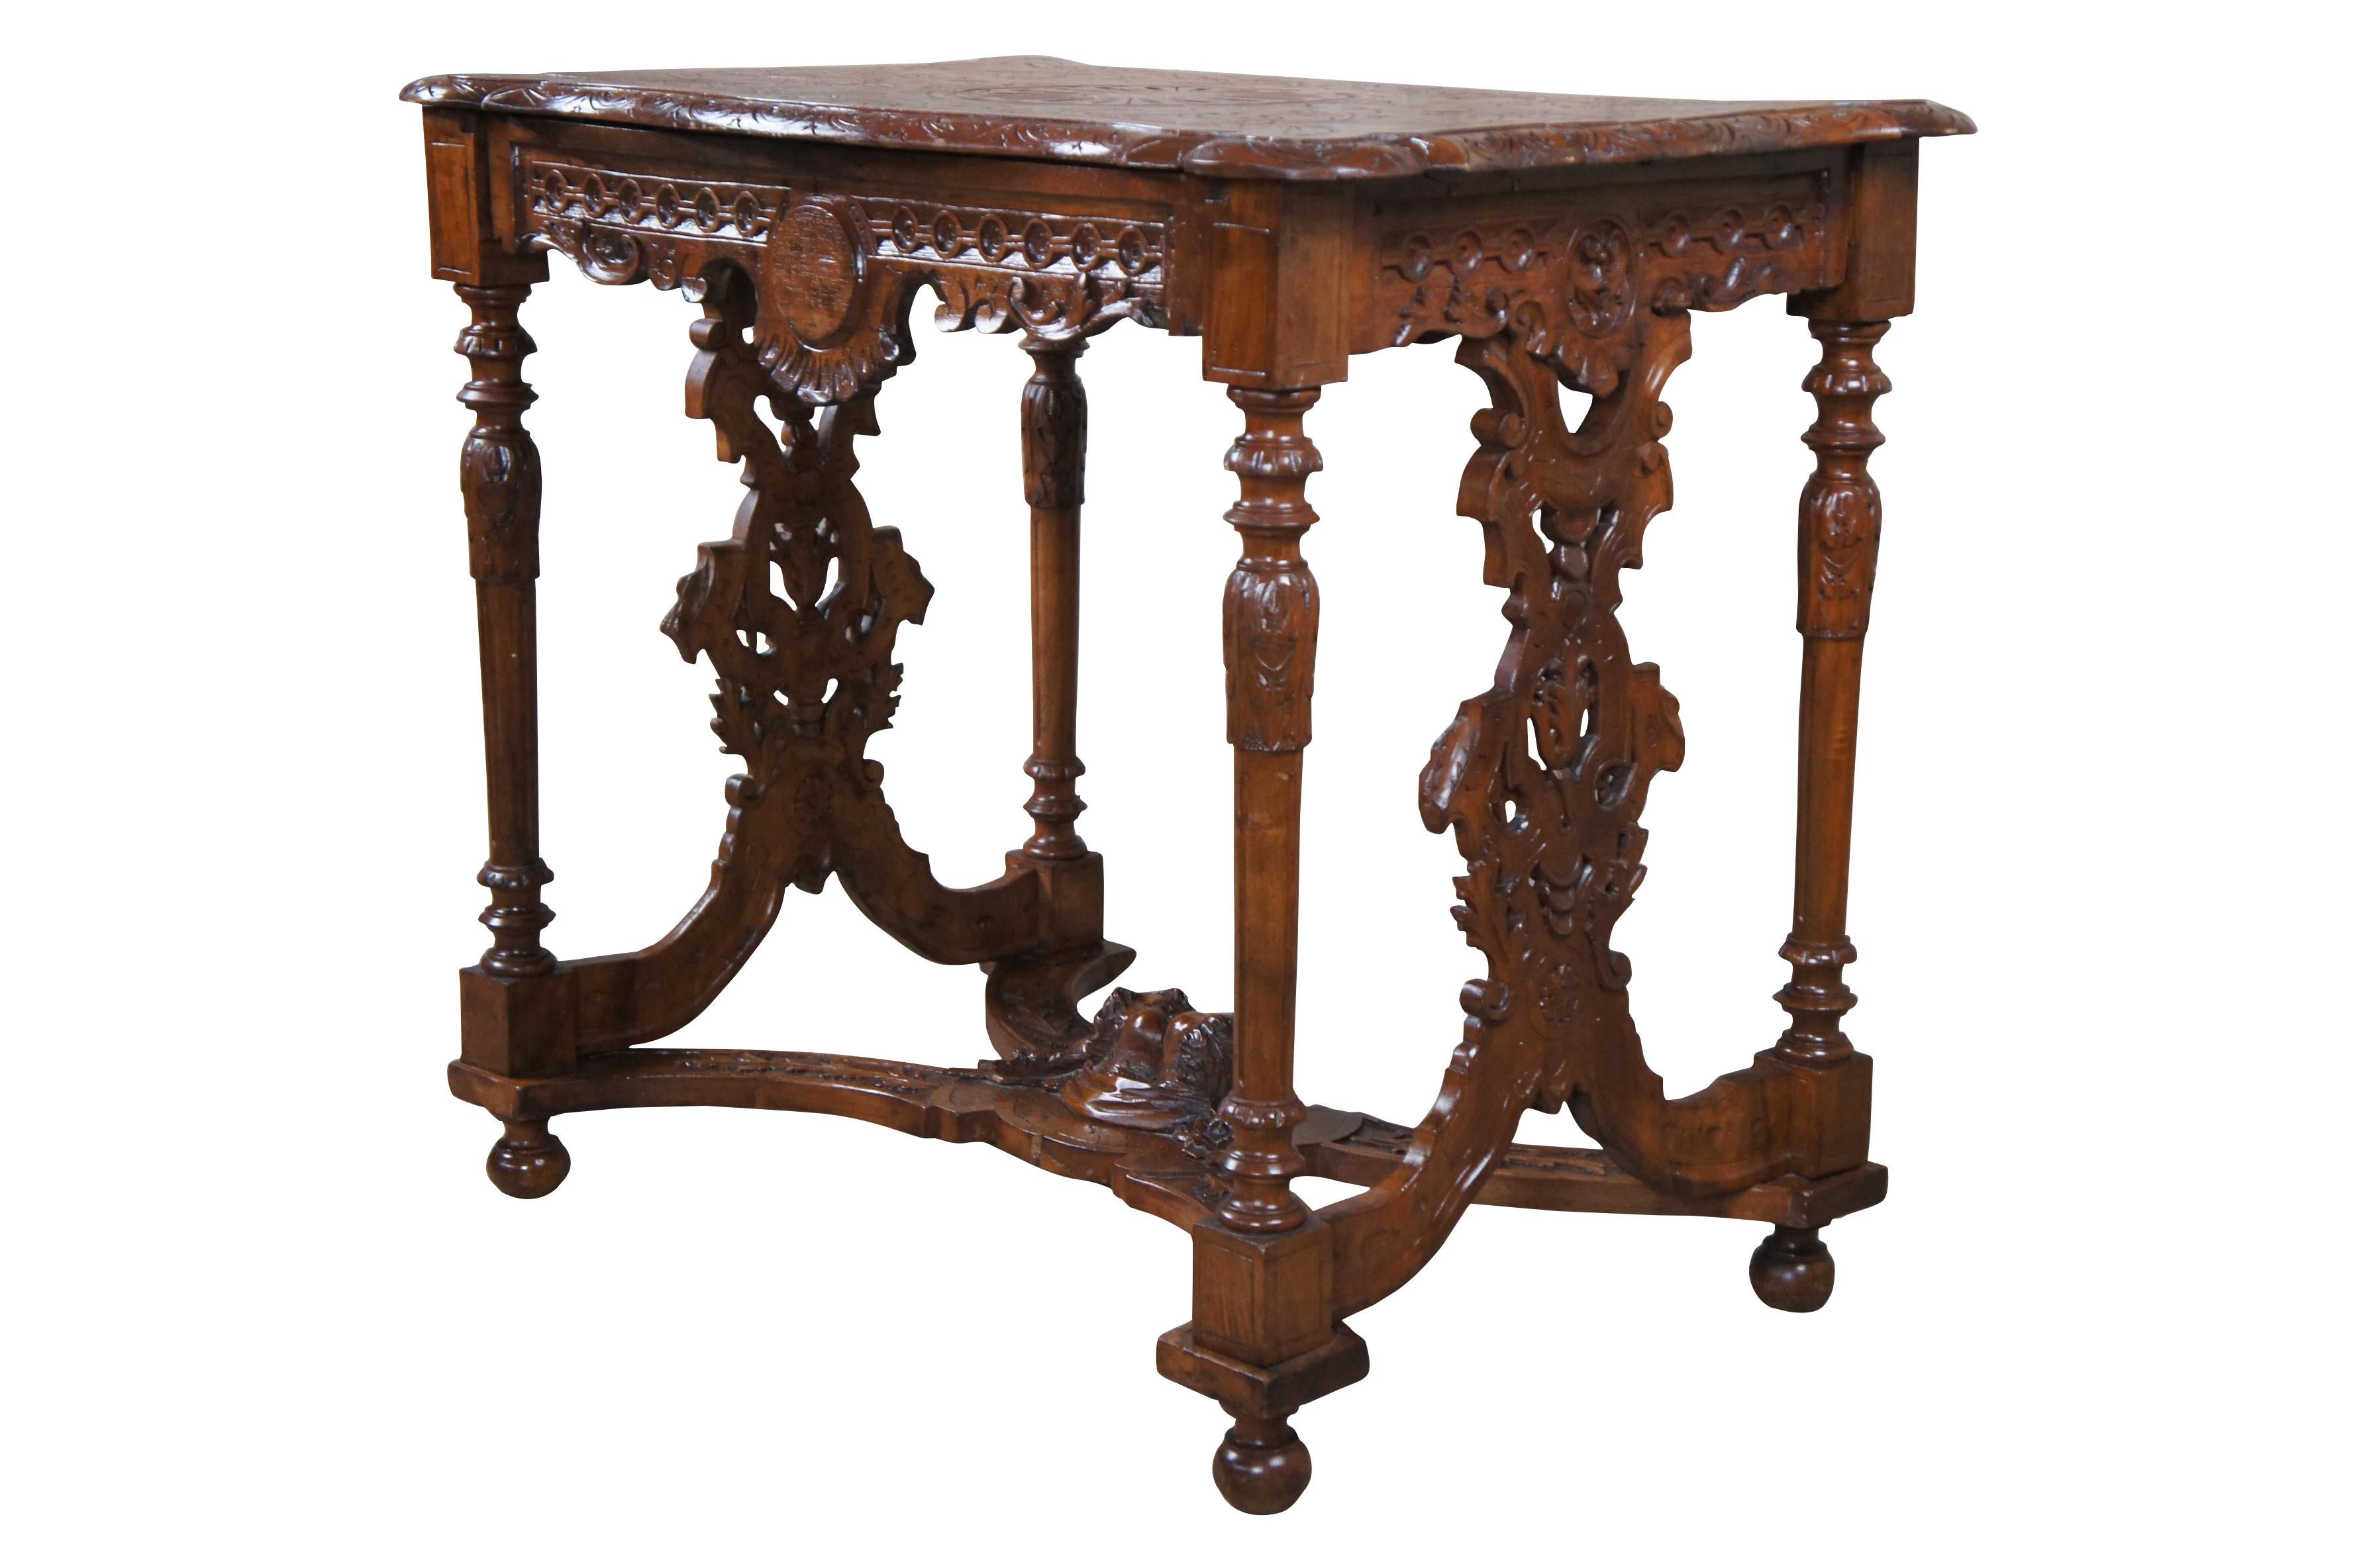 Antique Neo-Renaissance Revival parlor / library table or writing desk, circa 1870s Made of walnut featuring Neoclassical styling with high relief figural carvings of cherubs / puttis and acanthus / floral designs. The table has a carved top with